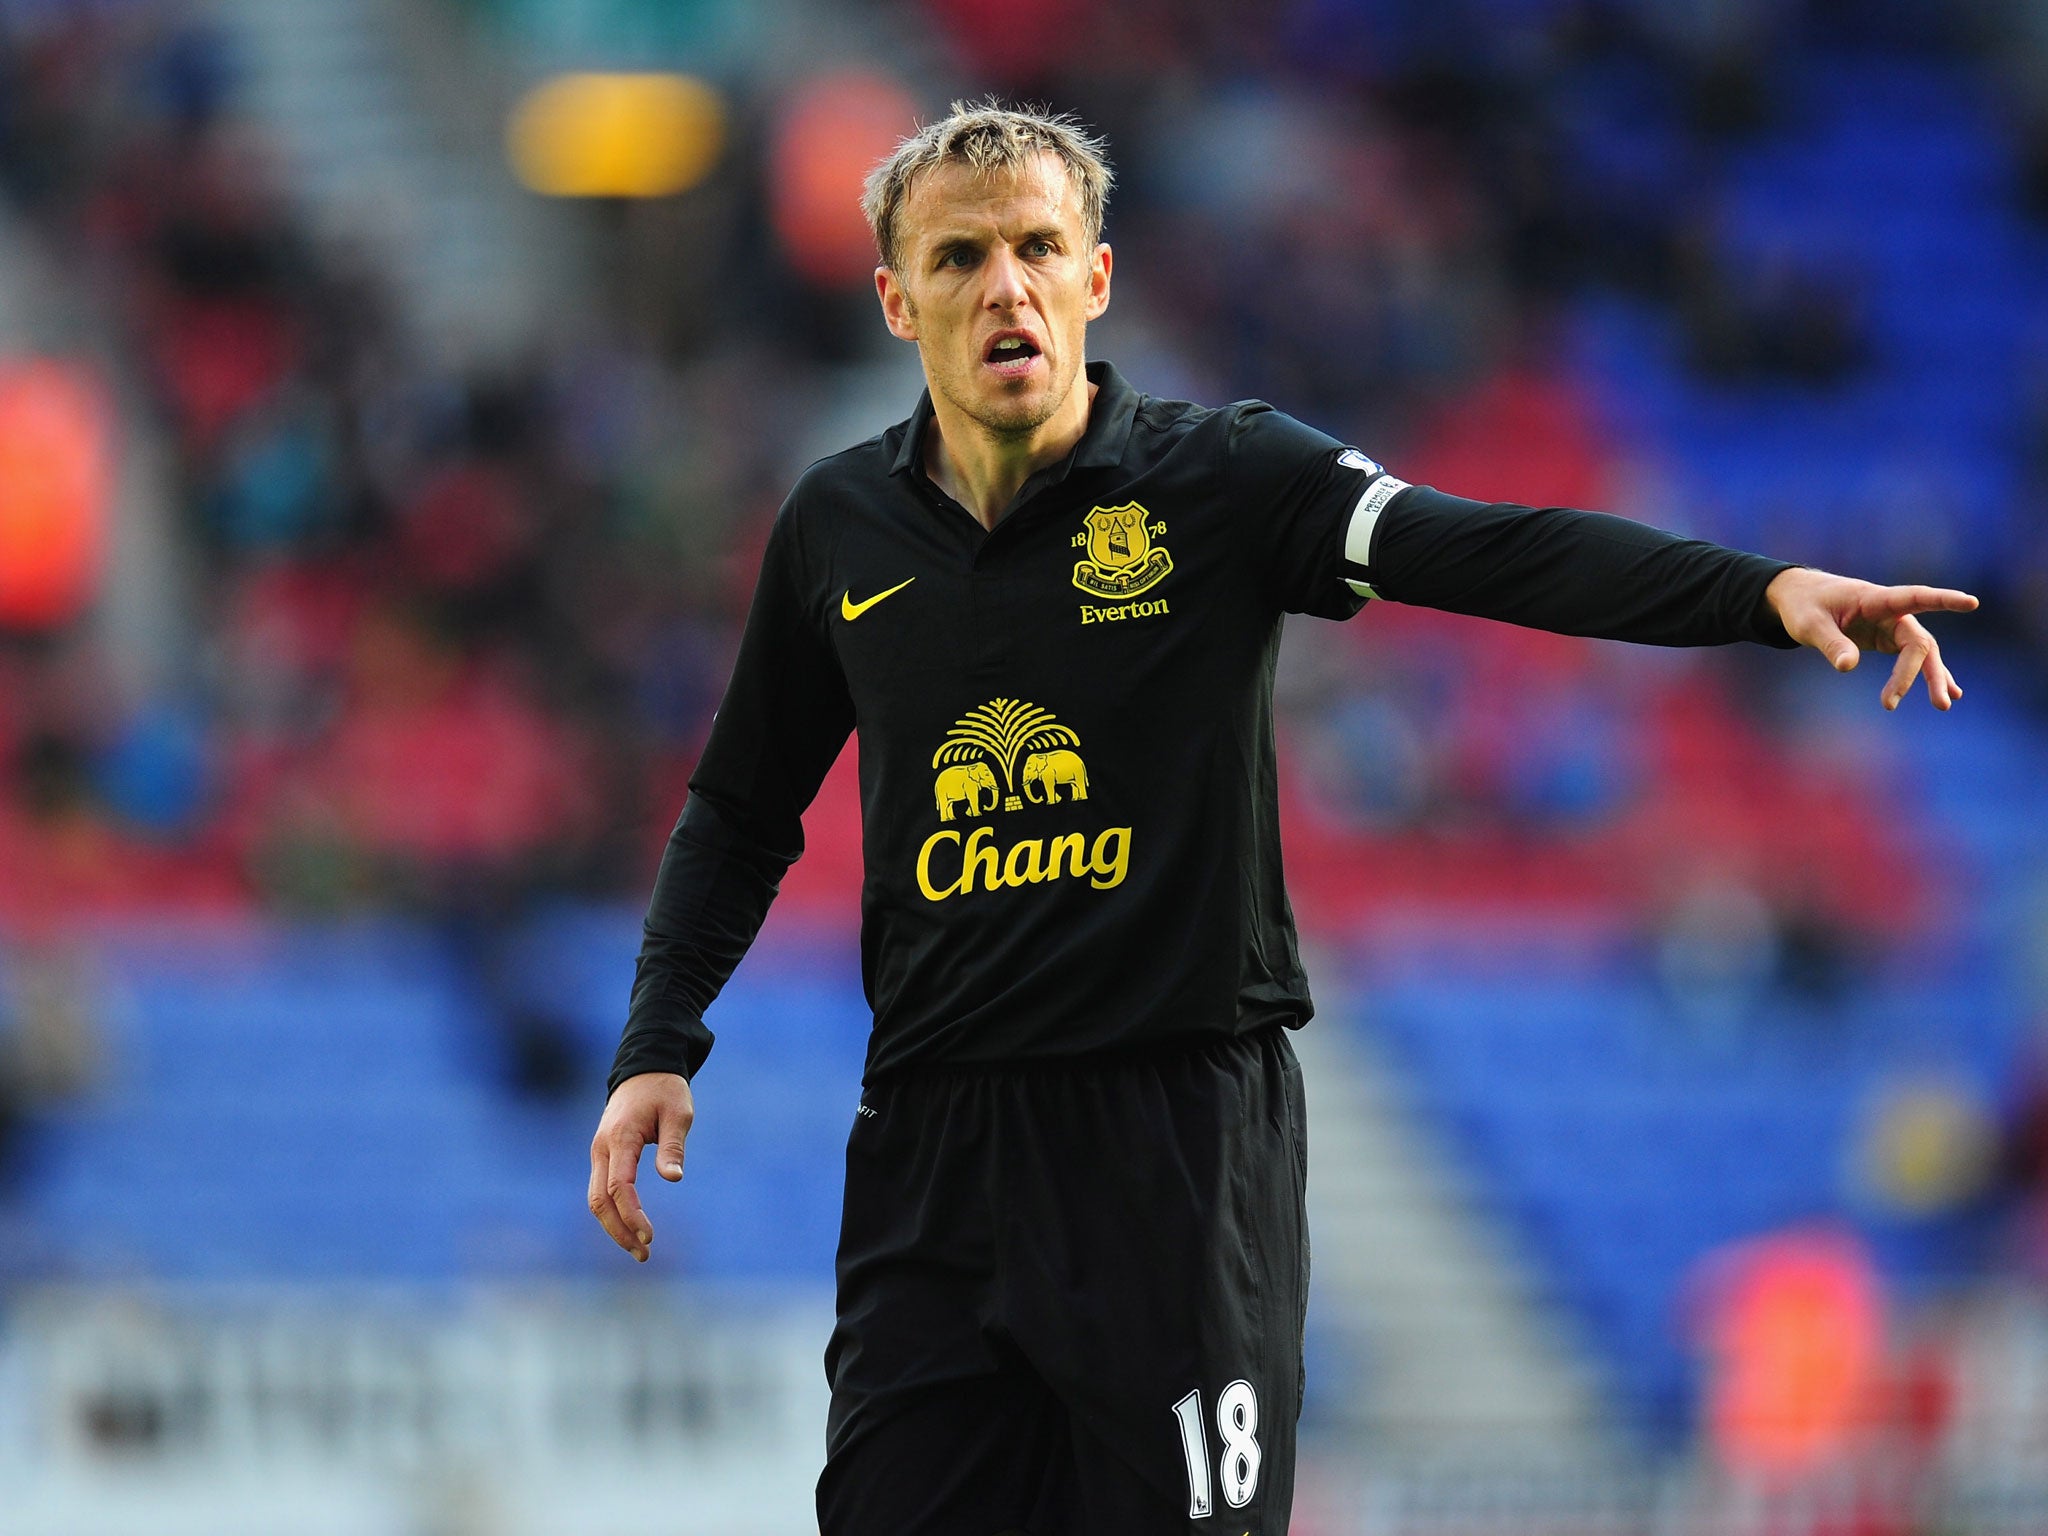 Phil Neville fails to impress his teammates in training: “I did my stepover on Drenthe this morning and he fell about laughing and thought it was a wind up-no respect nowadays!”